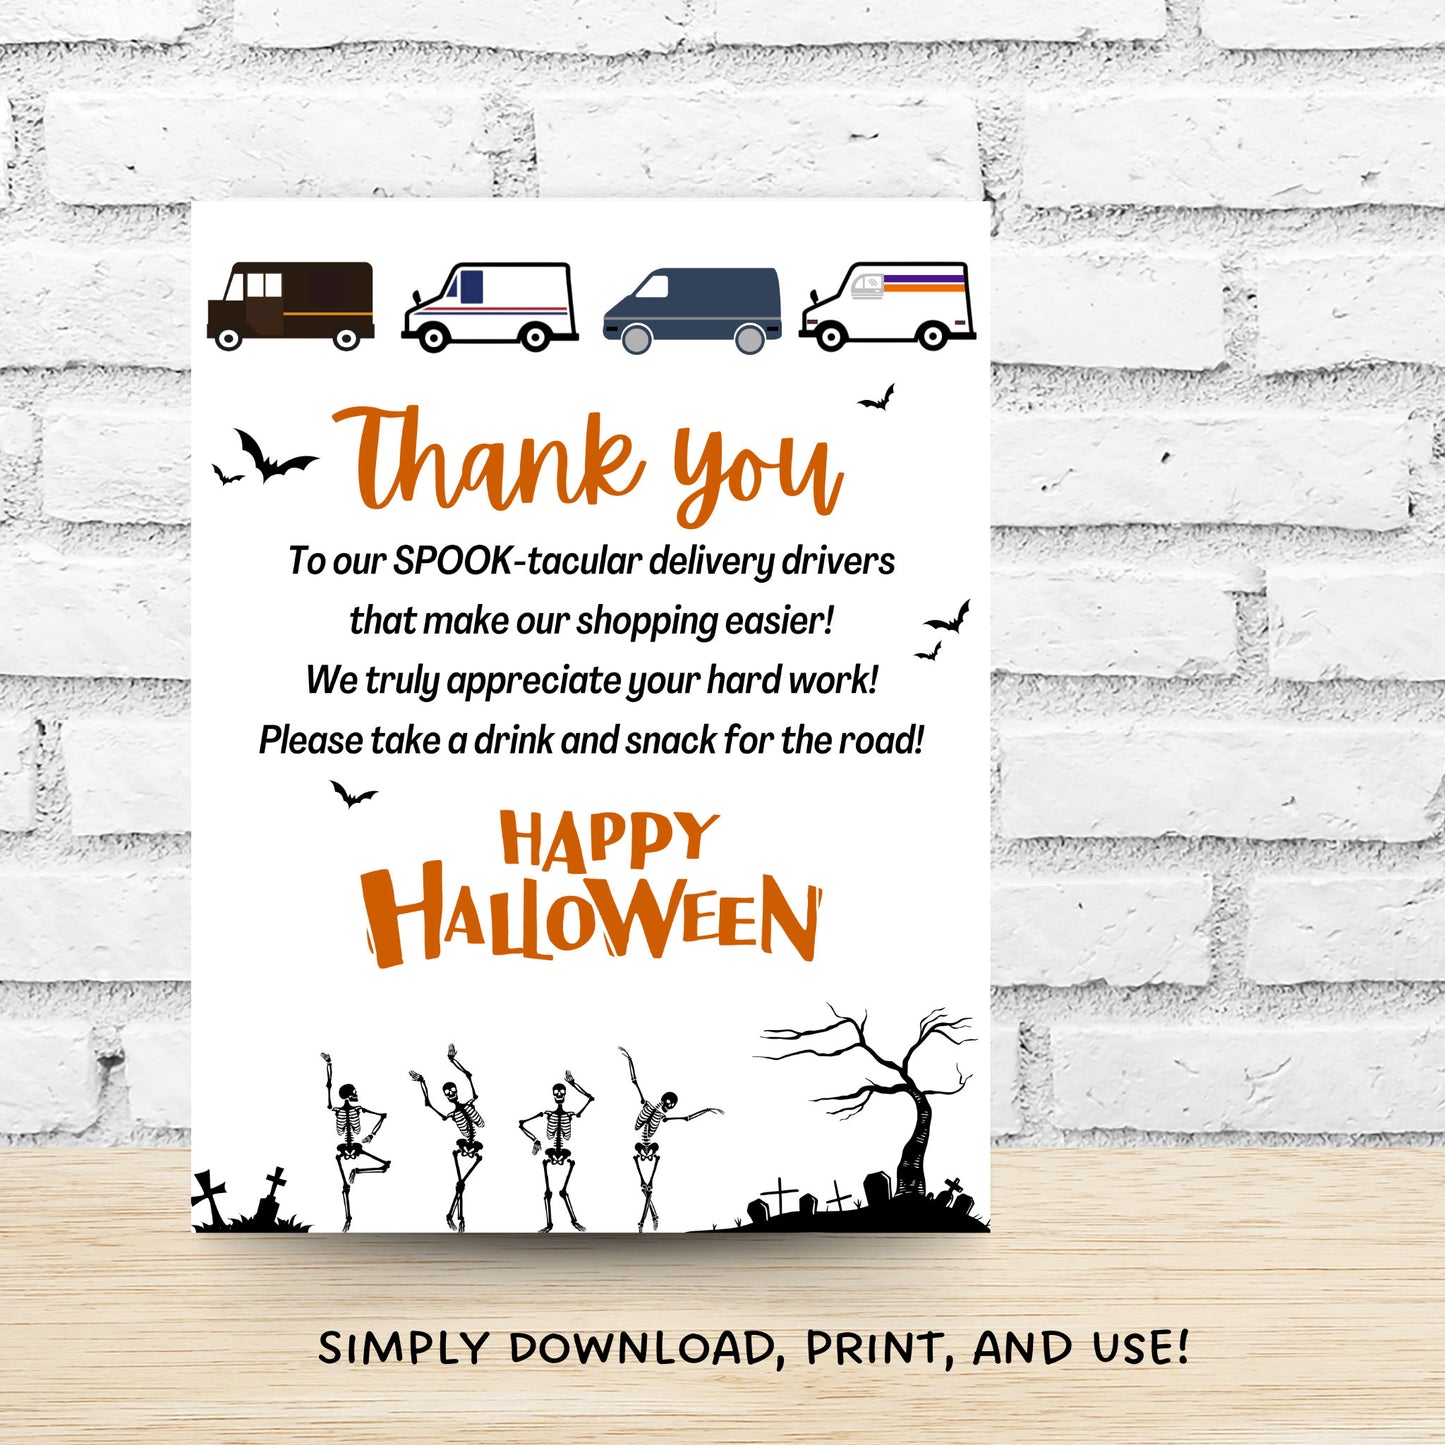 Halloween Delivery Driver Appreciation Sign, Thank You Sign, Snack & Drink Sign, Mail Carrier Treat Basket Printable Sign Halloween Delivery